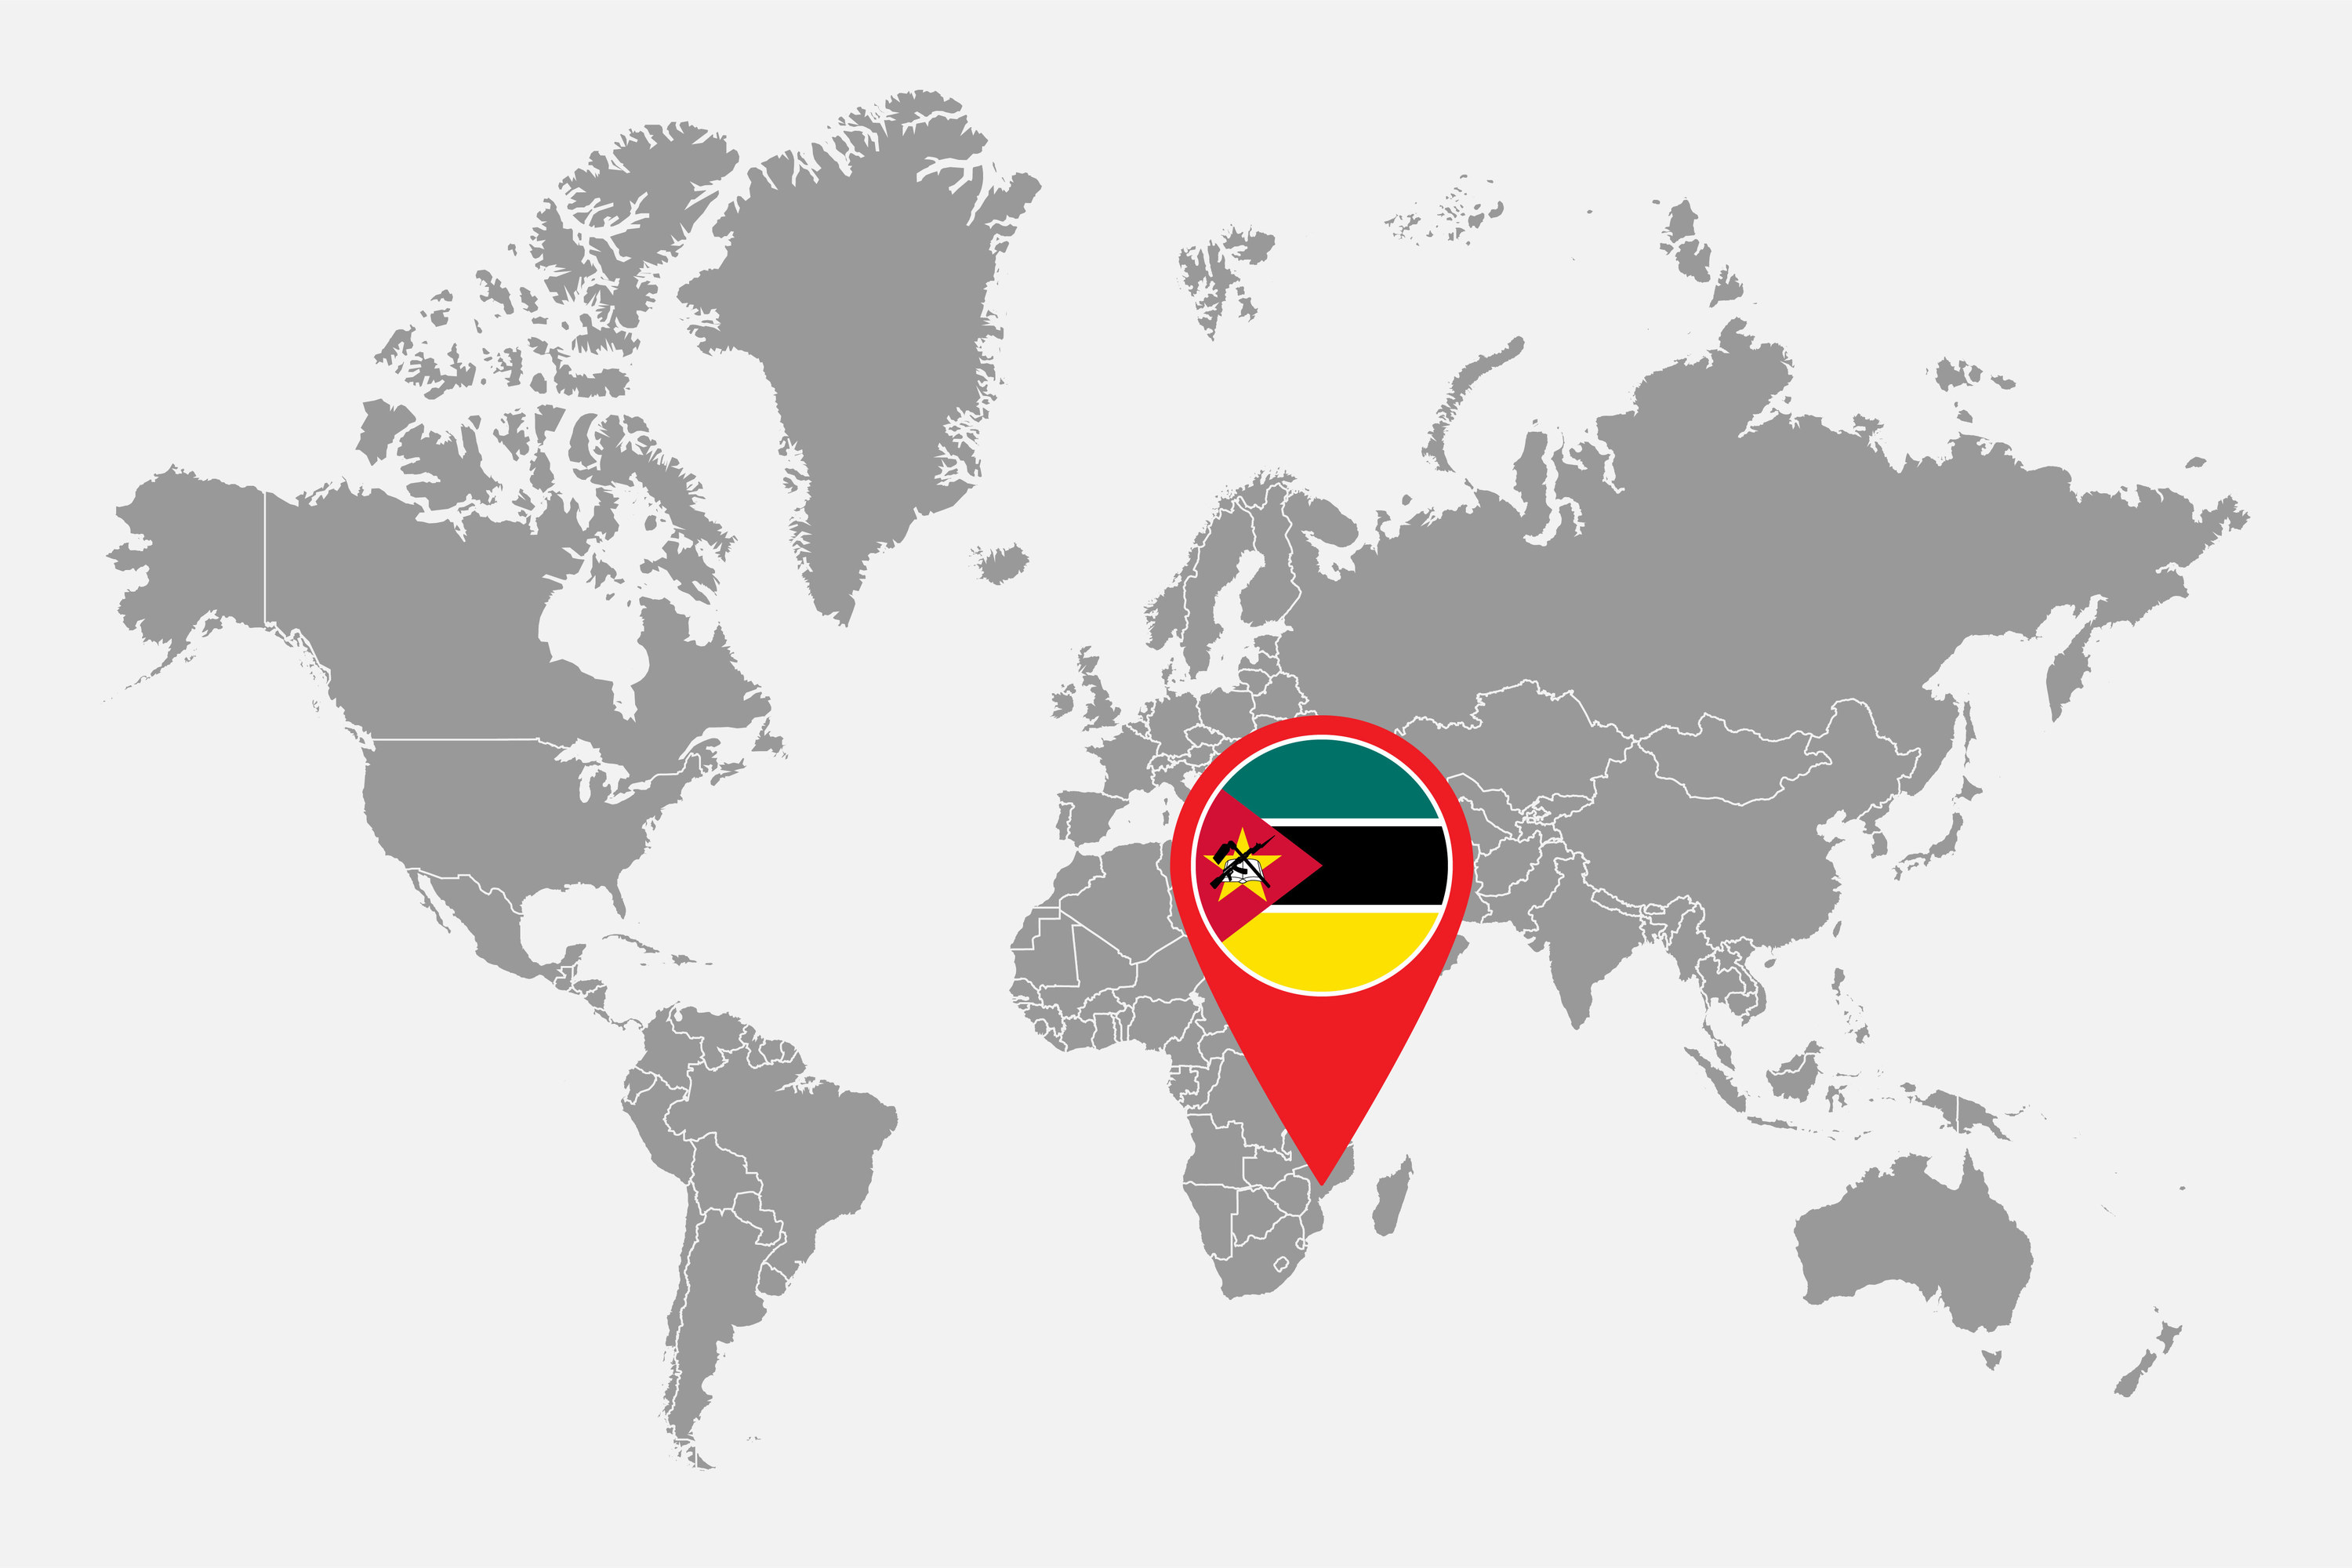 A world map with Mozambique indicated